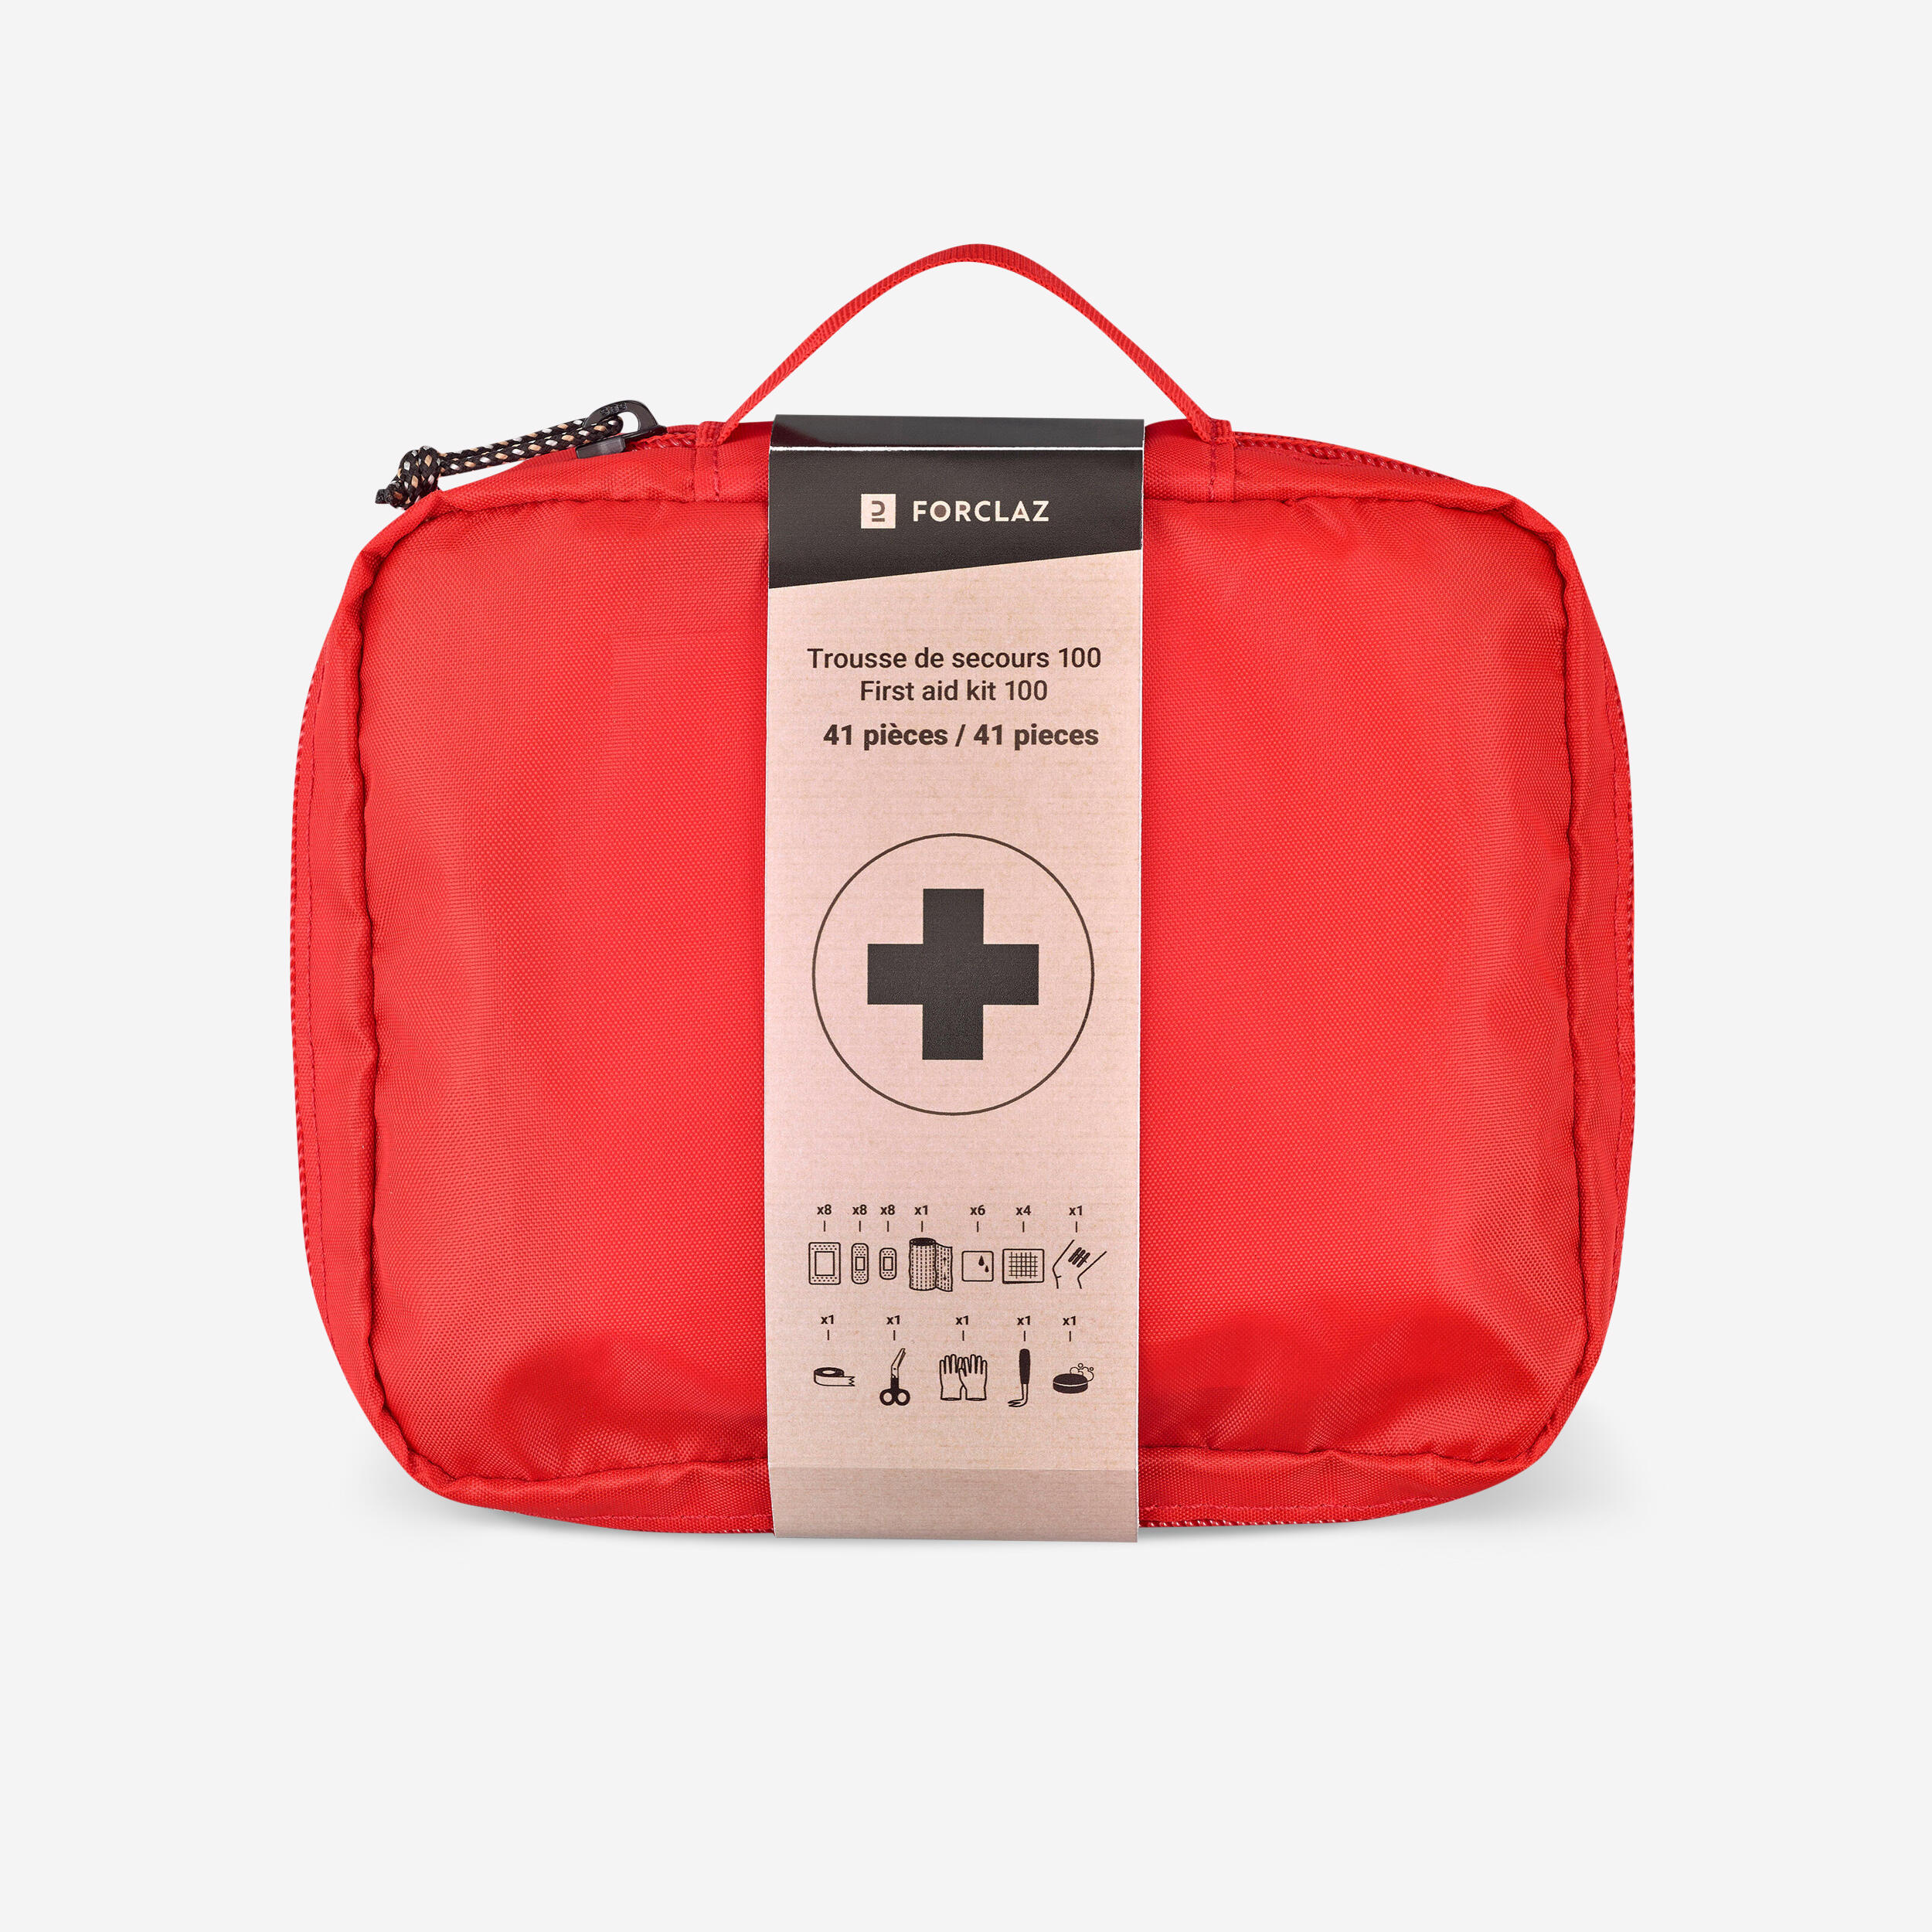 FORCLAZ First-Aid Kit 100 41 Pieces